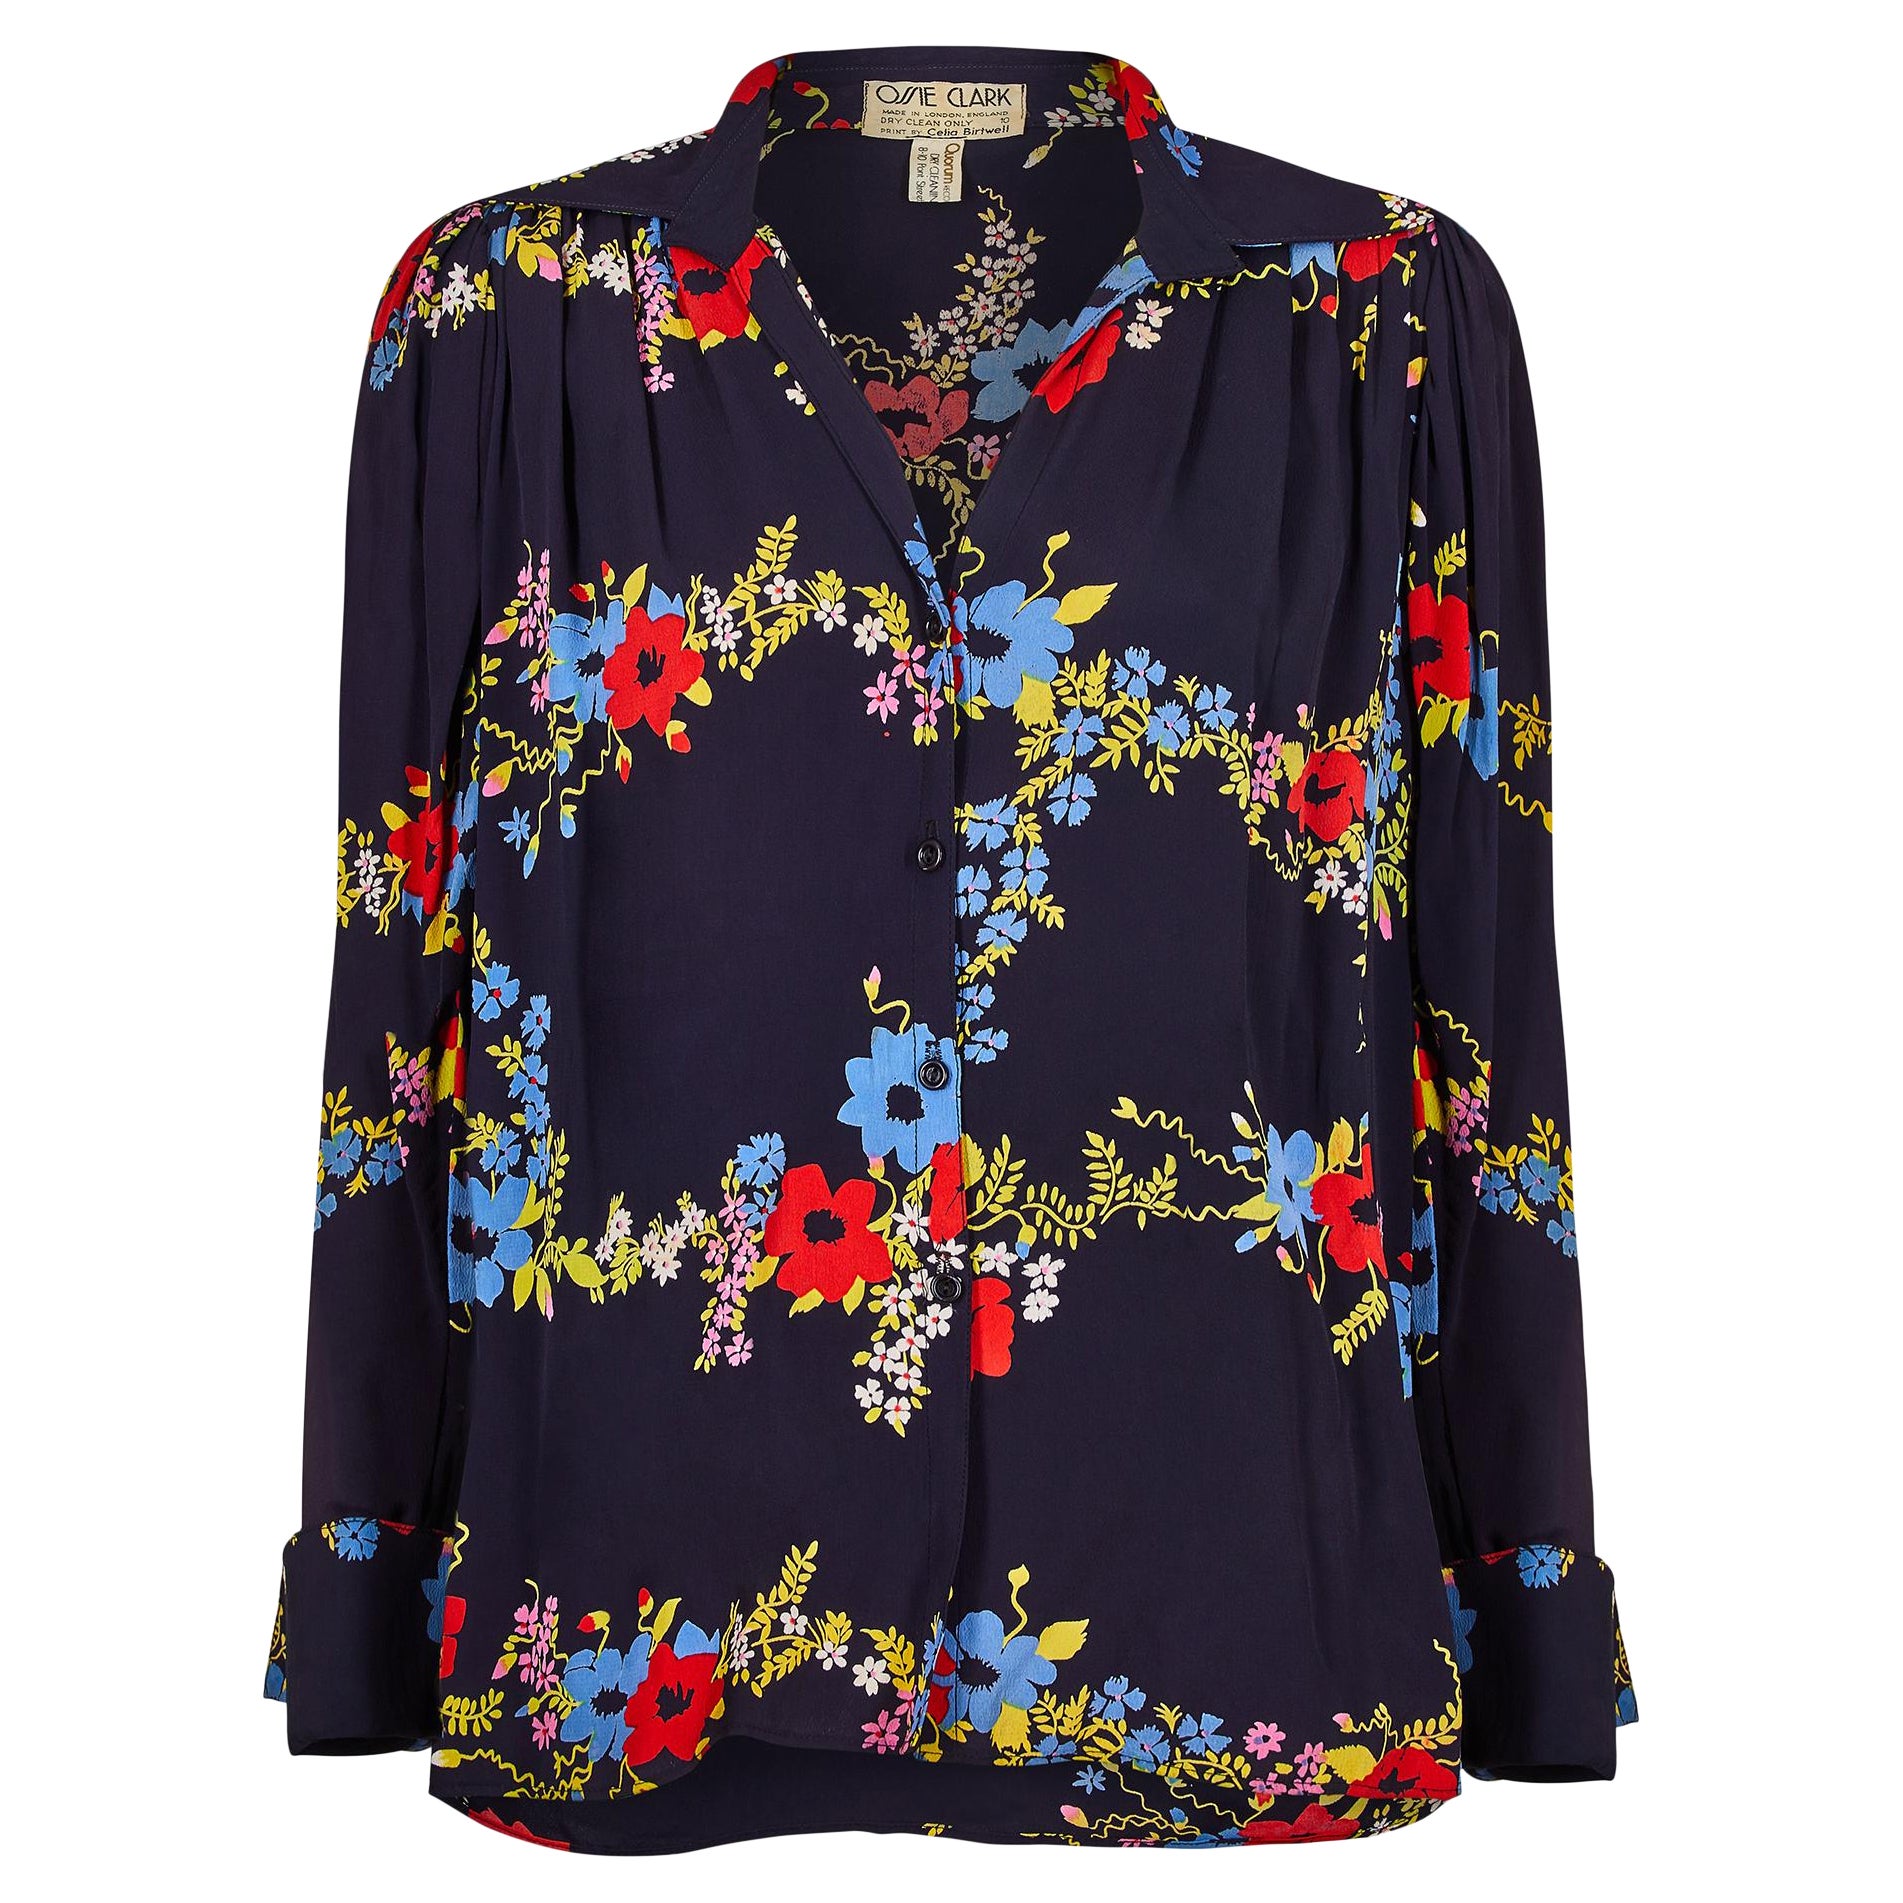 1970s Ossie Clark Navy Floral Print Blouse with Celia Birtwell Print